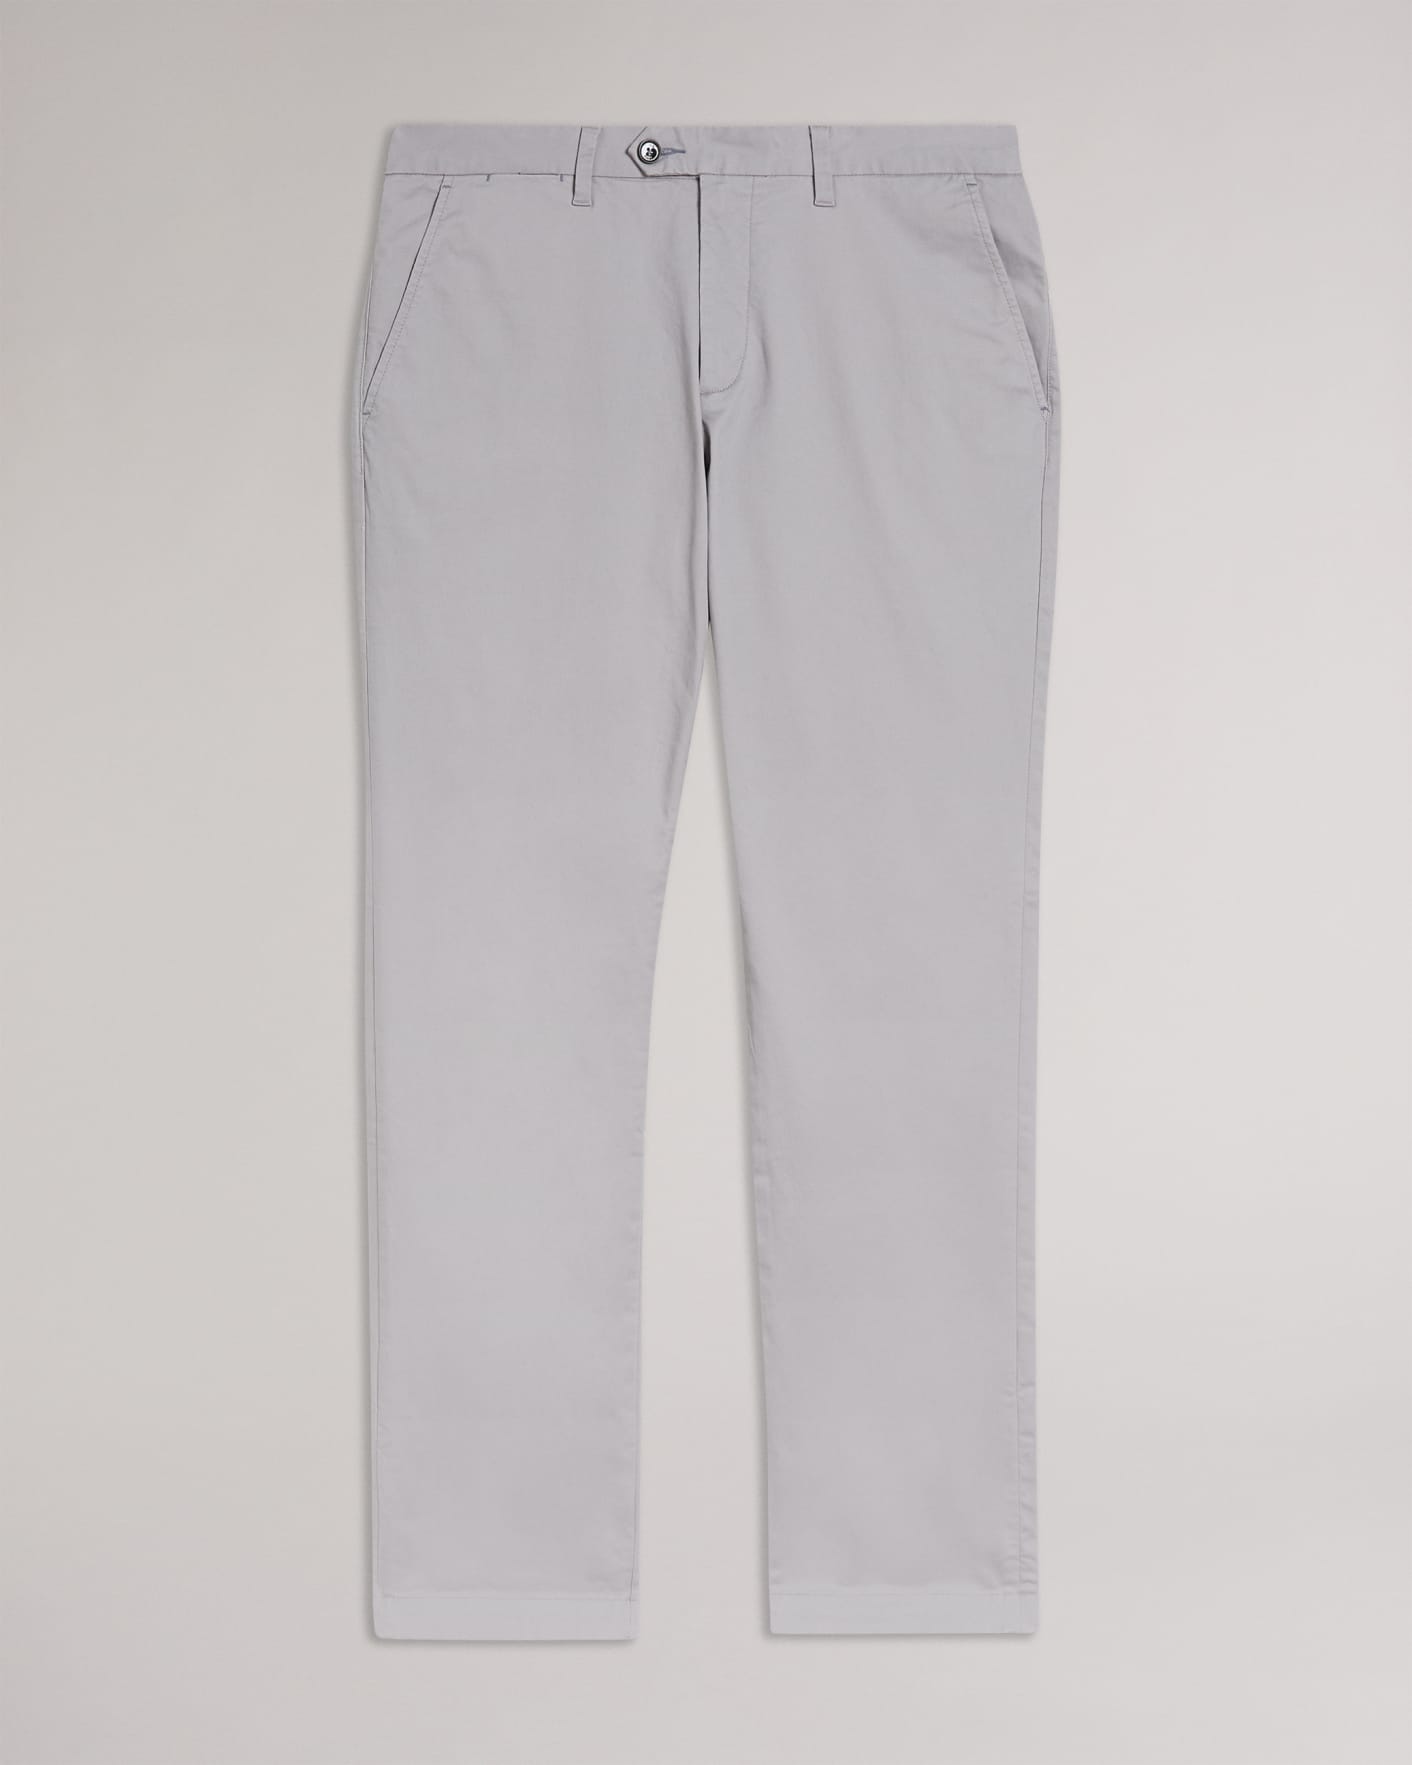 Gris intermedio Chinos Classic Fit Ted Baker